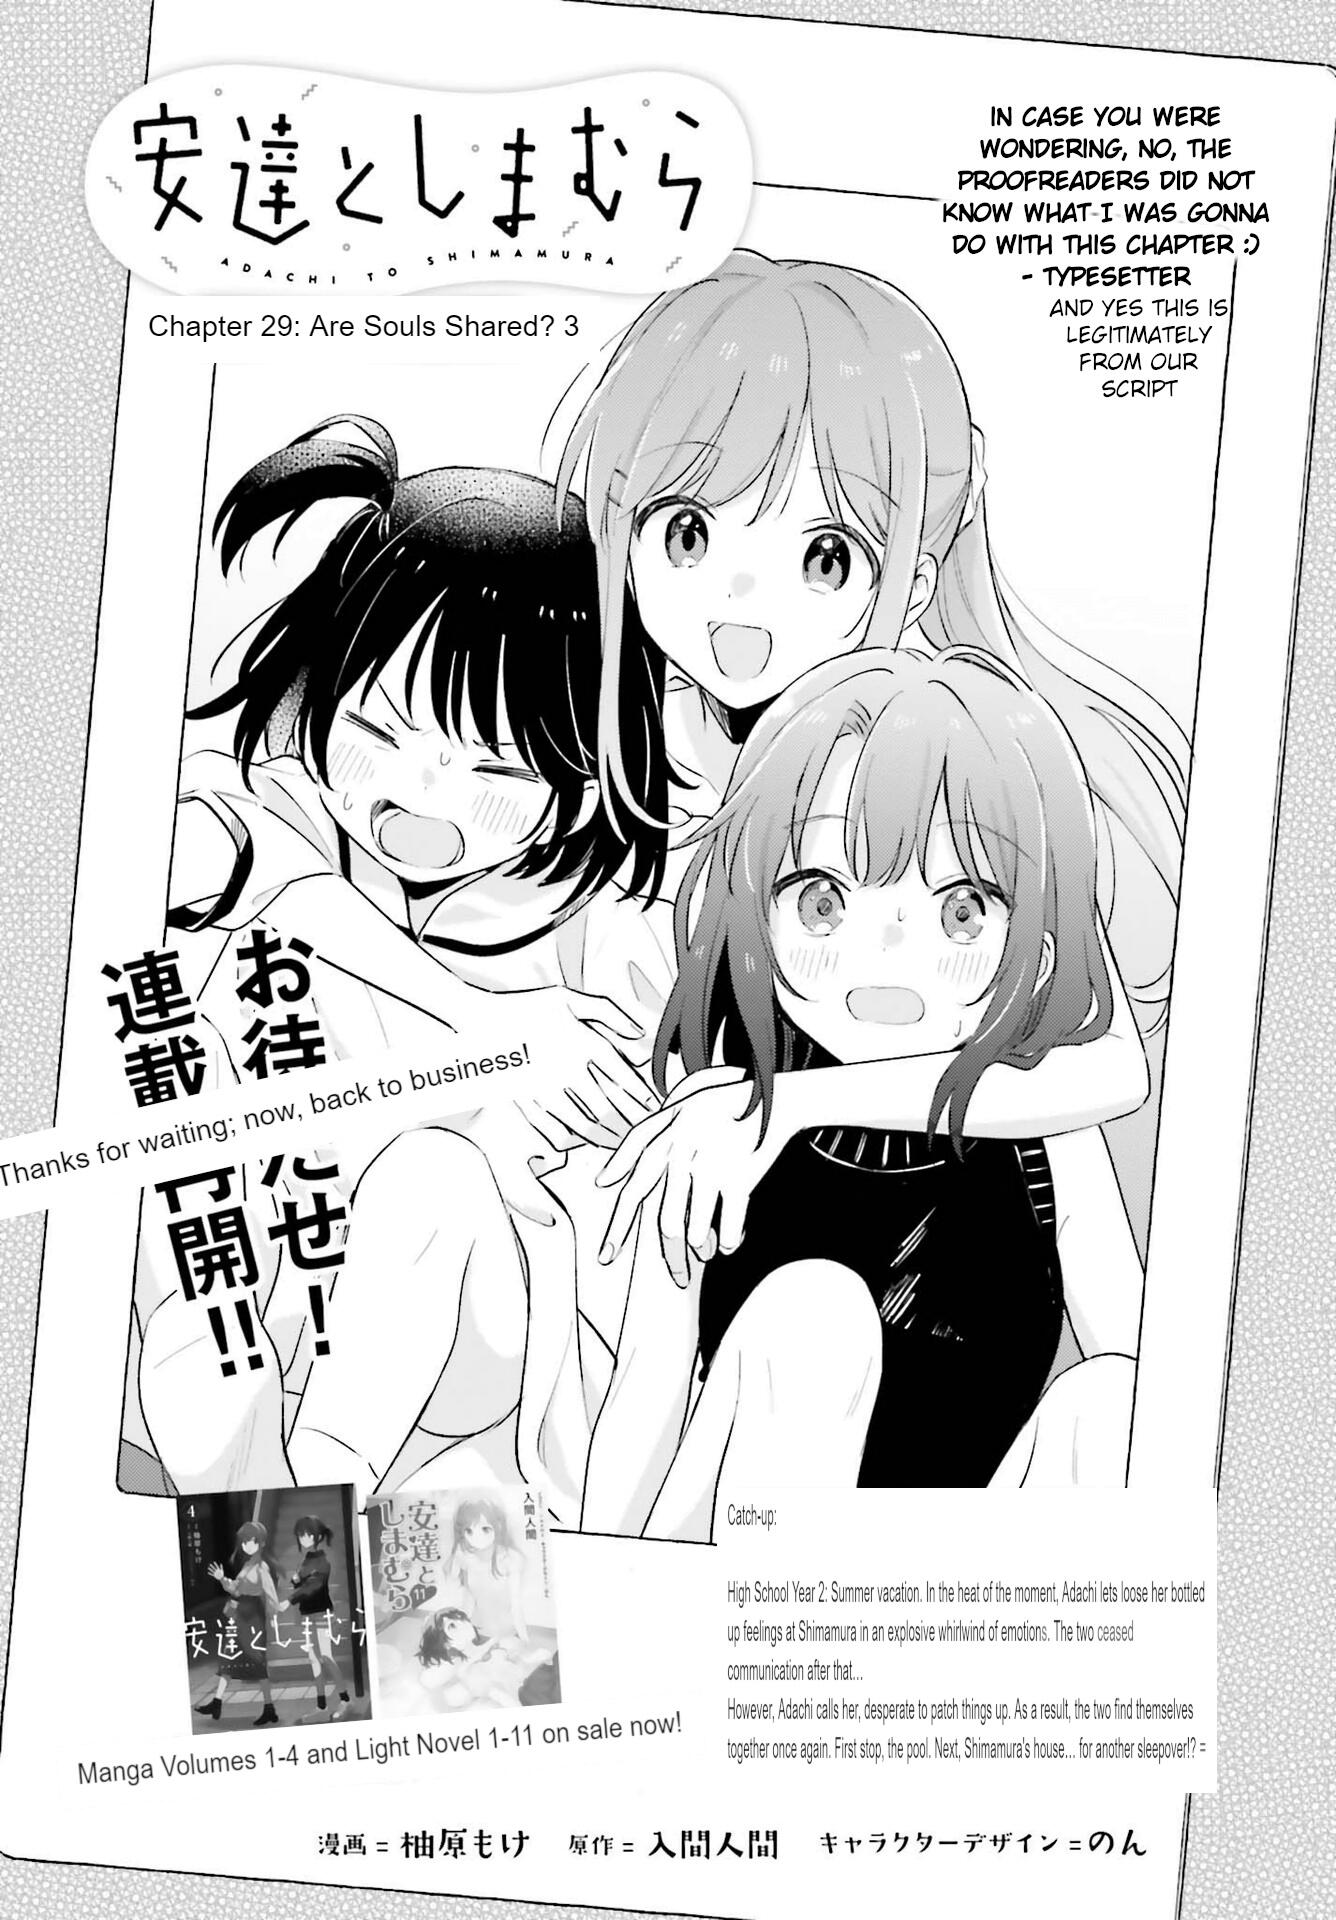 Read Adachi To Shimamura Chapter 29.3: Are Souls Shared? 3 on